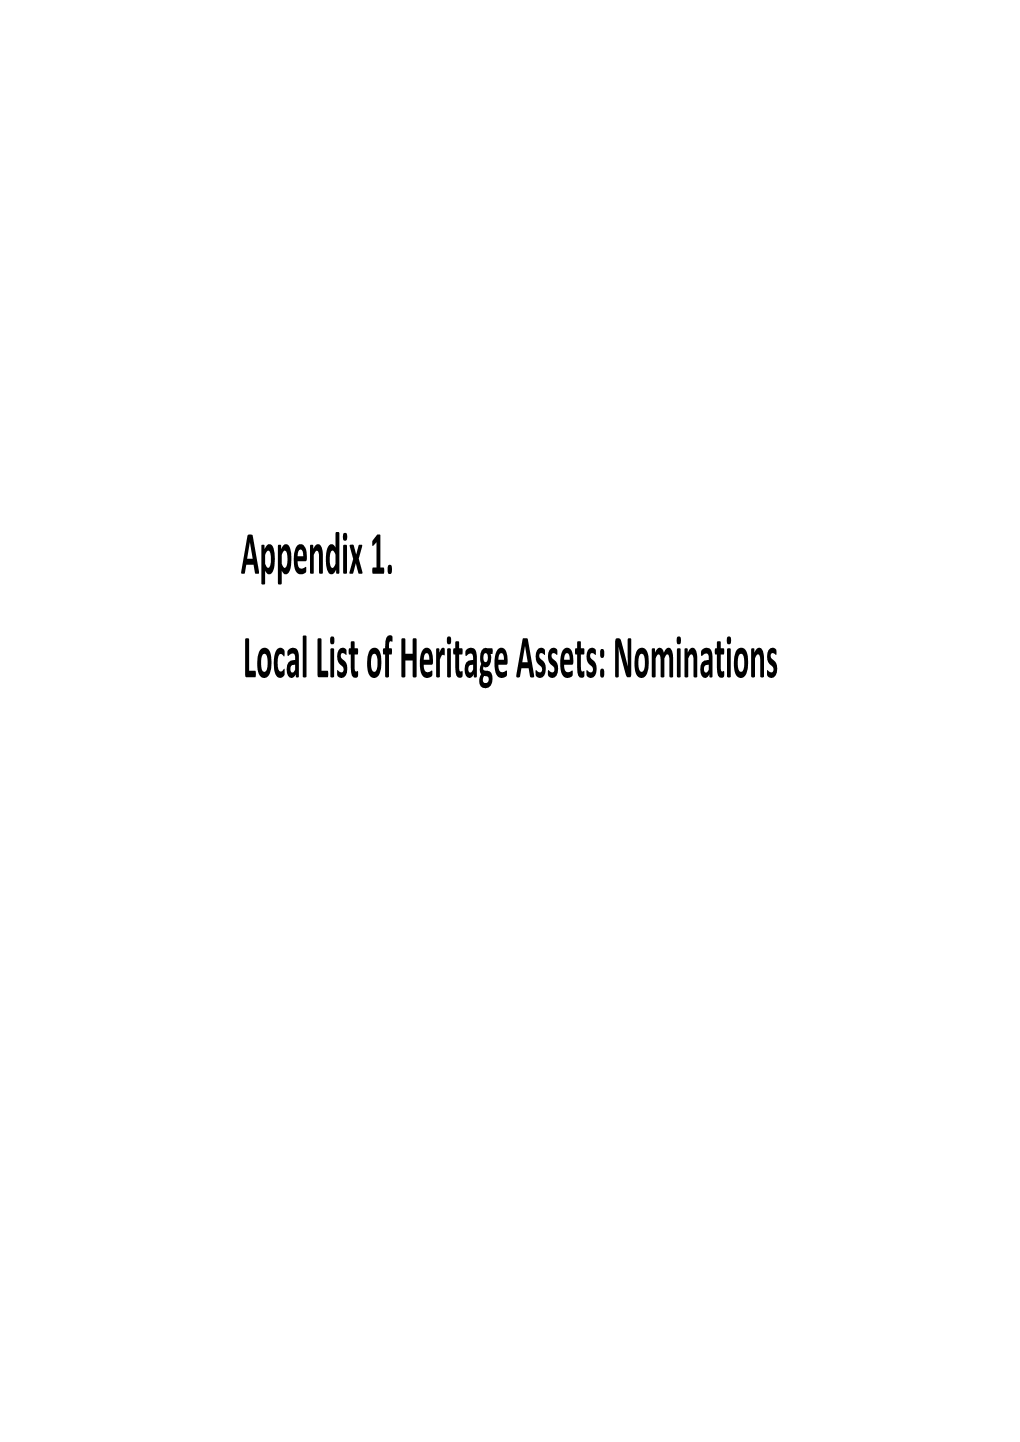 Appendix 1. Local List of Heritage Assets: Nominations